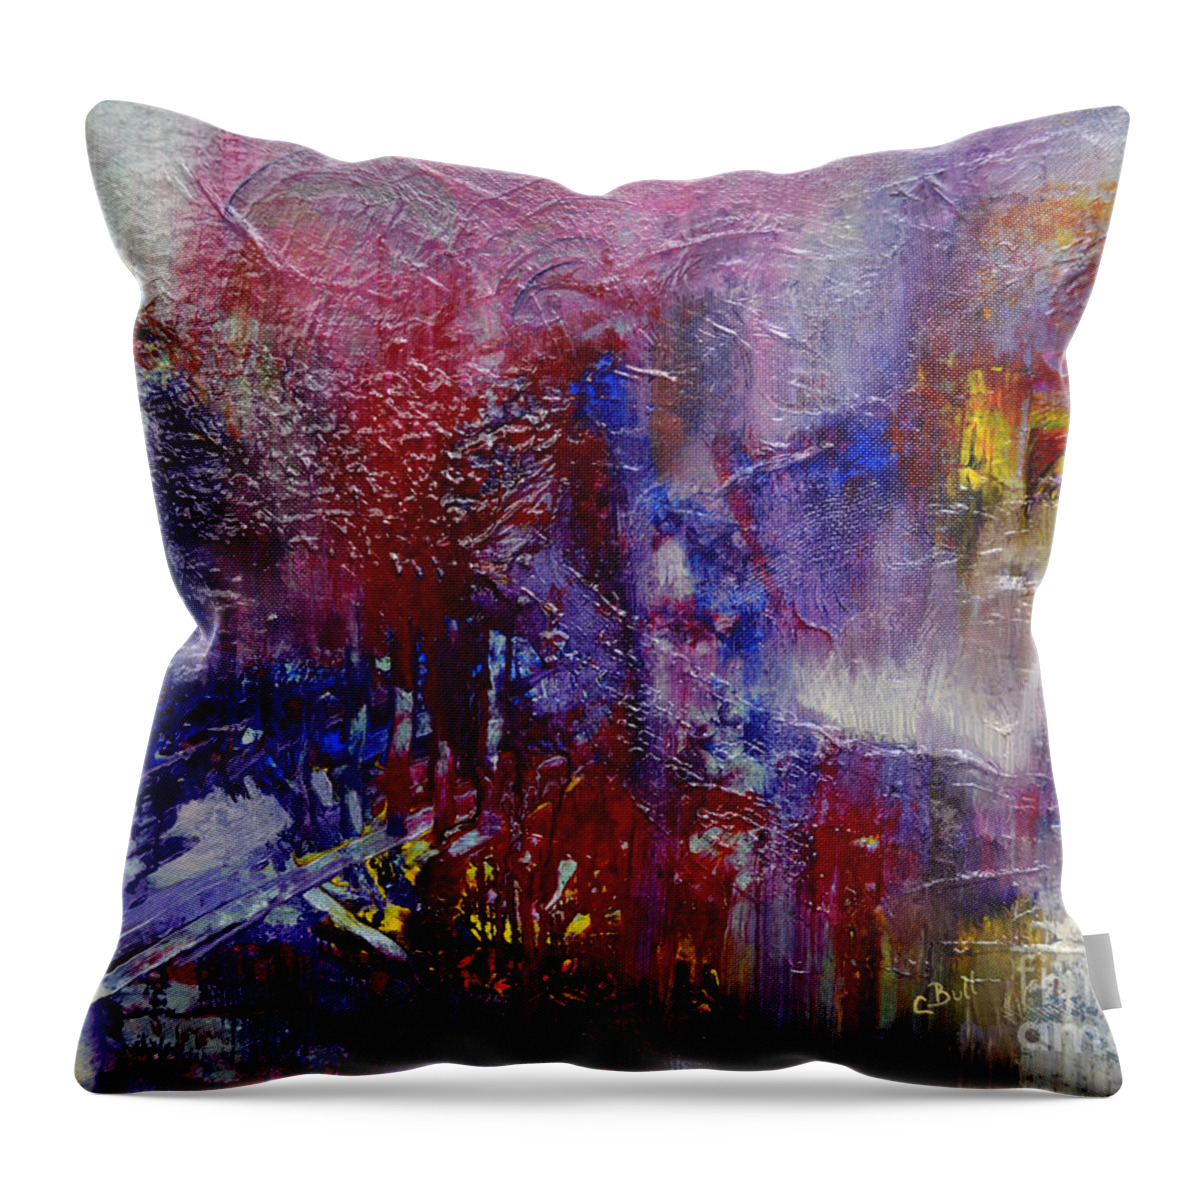 Abstract Throw Pillow featuring the painting Let It Rain by Claire Bull